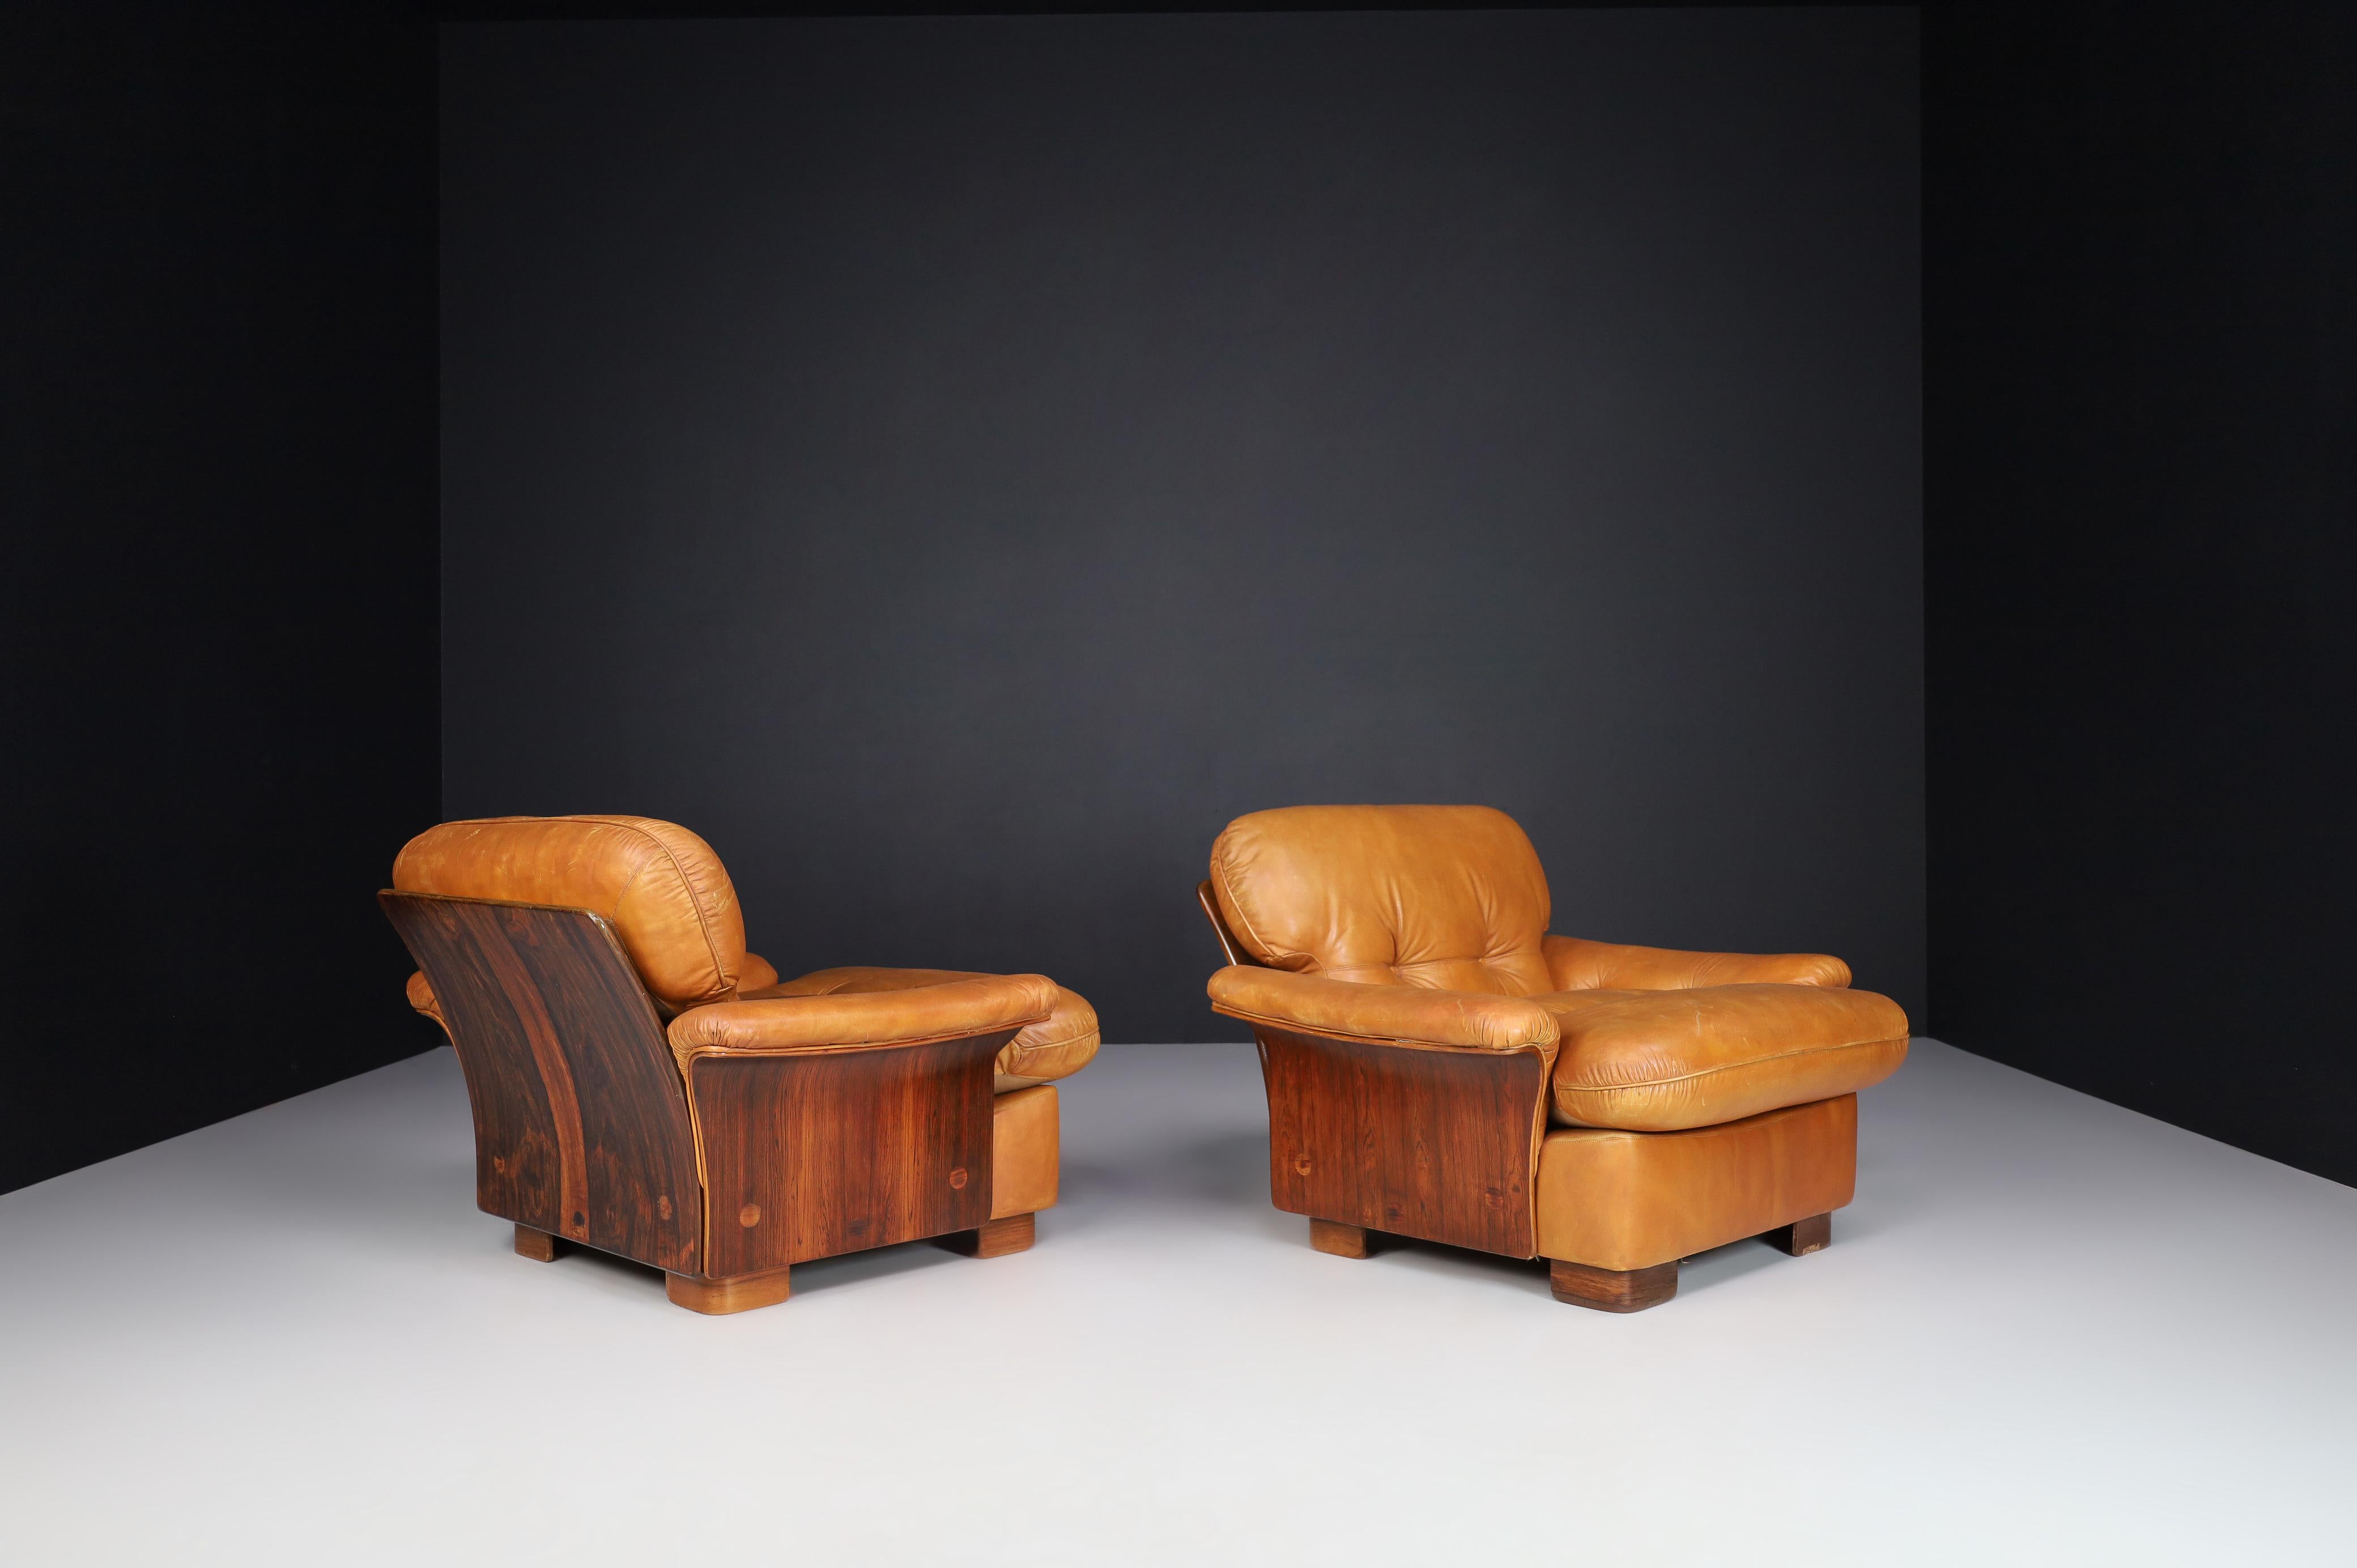 Mid-century cognac leather and bentwood armchairs-lounge chairs, Italy 1960s

Mid-century cognac leather and bentwood armchairs-lounge chairs manufactured and designed in Italy 1960s. It is in lovely vintage condition, with a minor patina on the